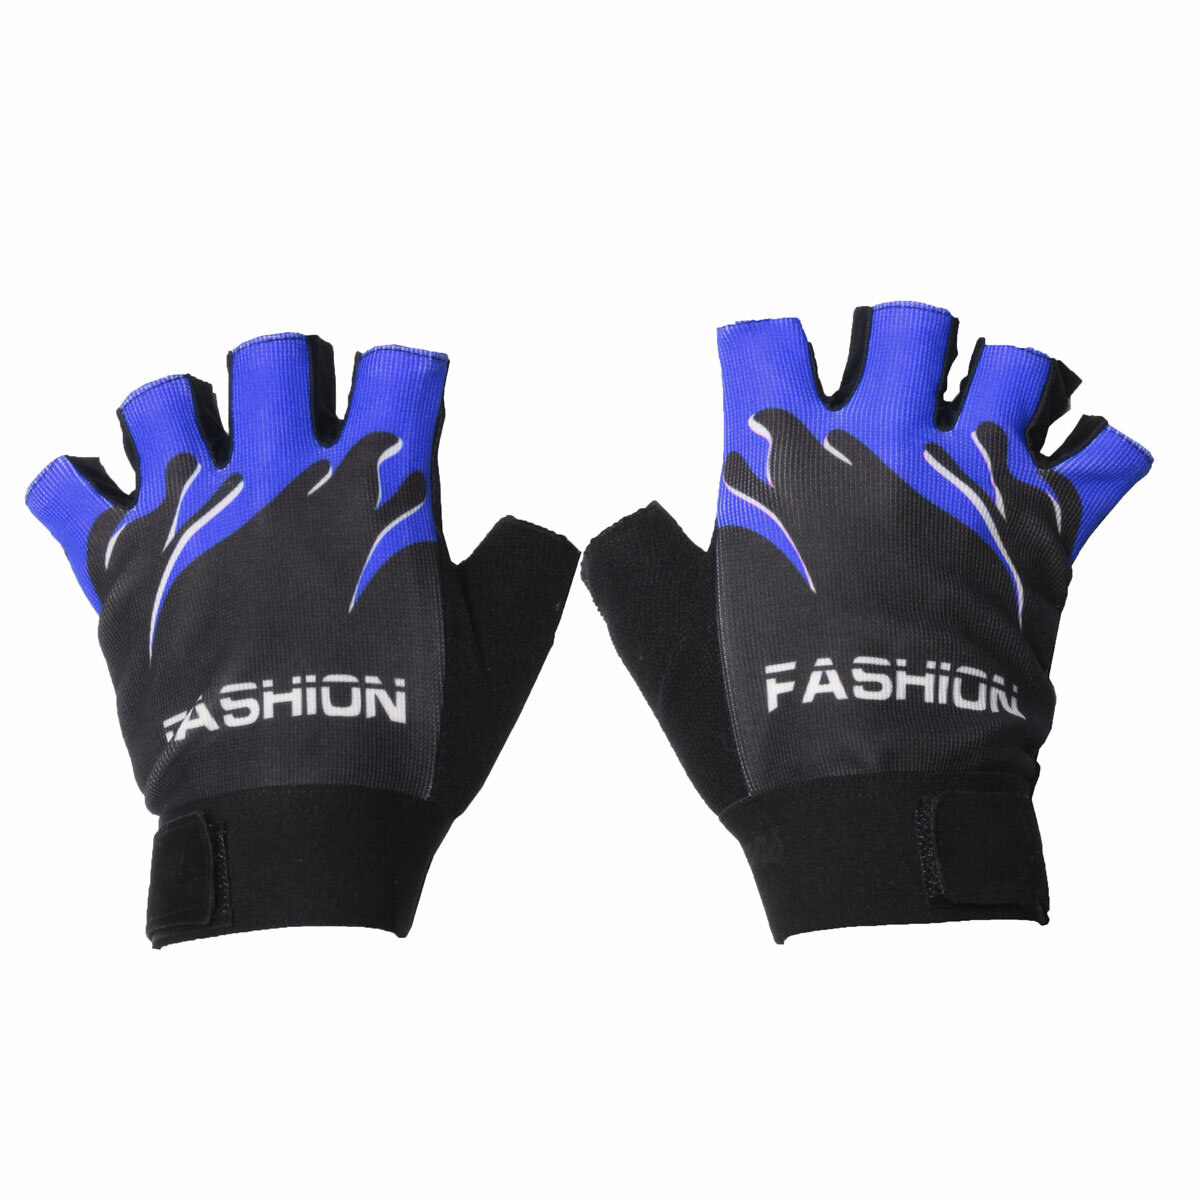 Motorcycle Cycling Half Finger Gloves Sport Mountain Bike Antiskid 4 Colors